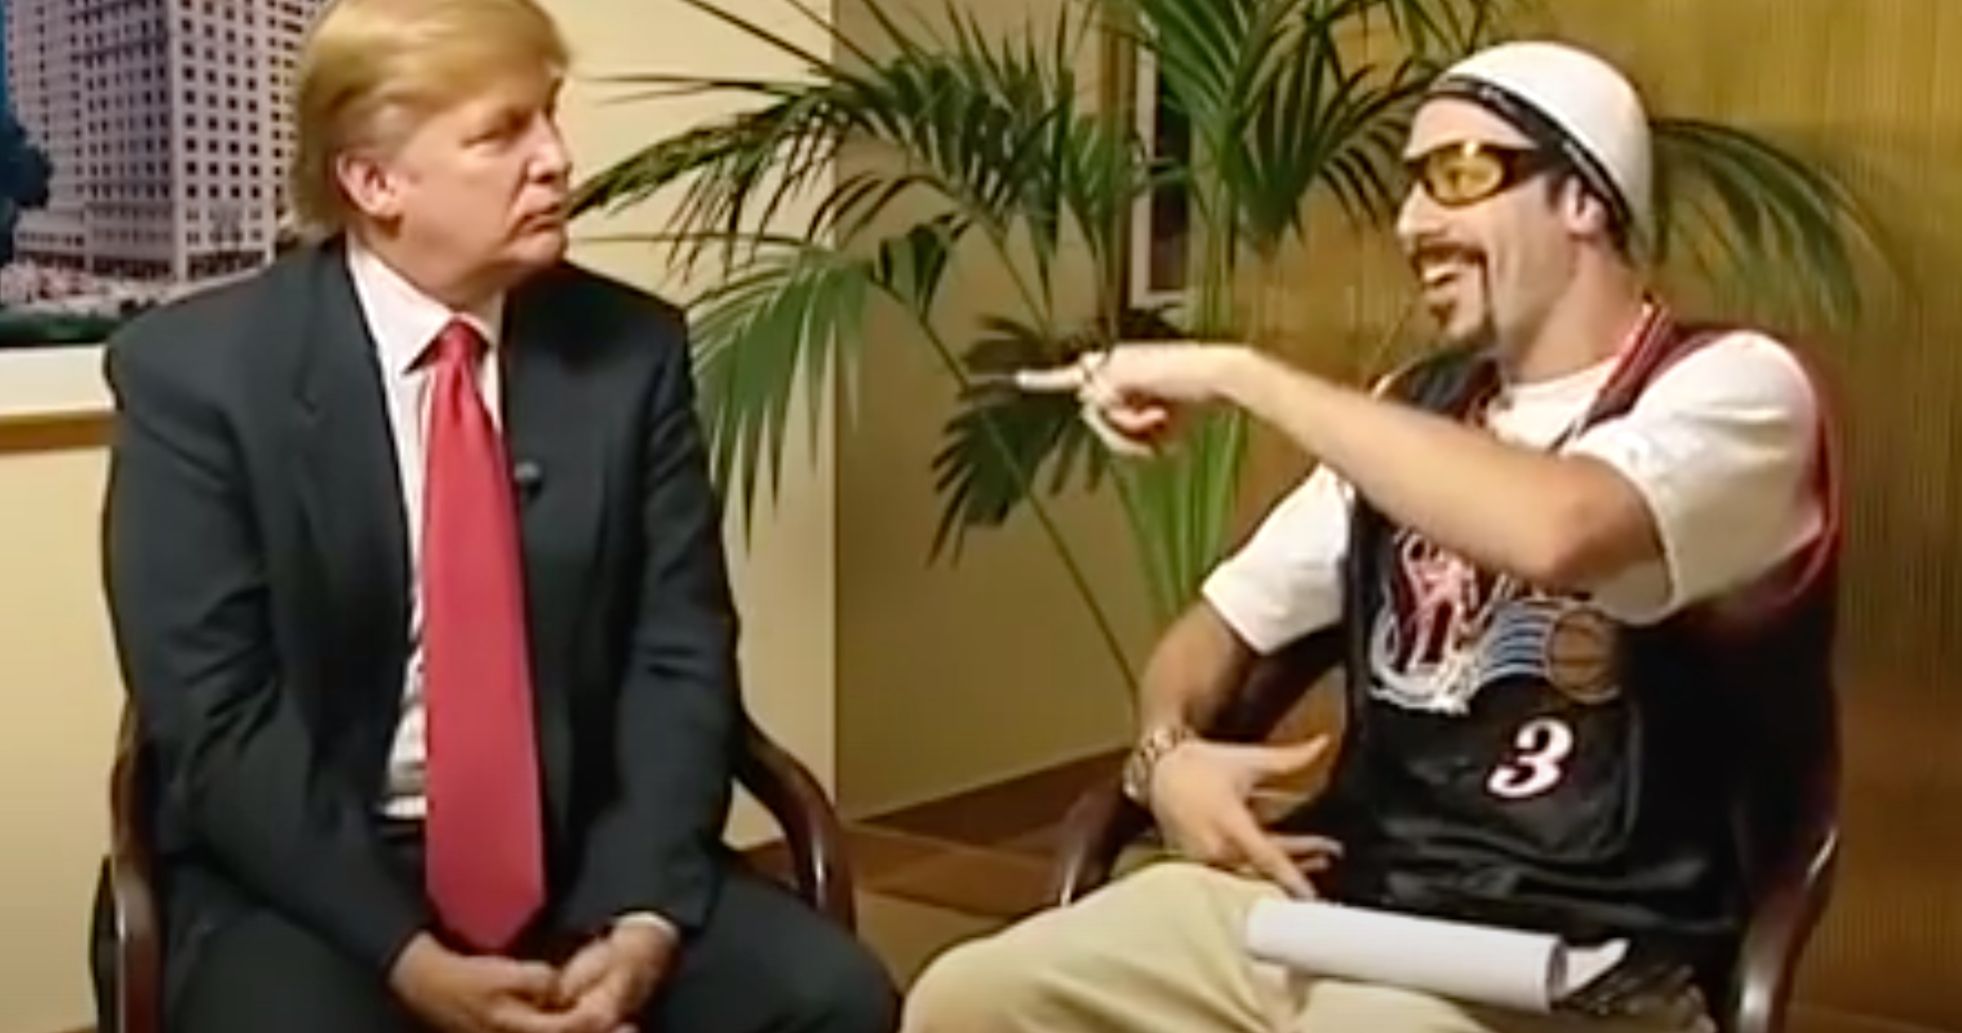 Sacha Baron Cohen Shares His Side of the Infamous Ali G Trump Interview